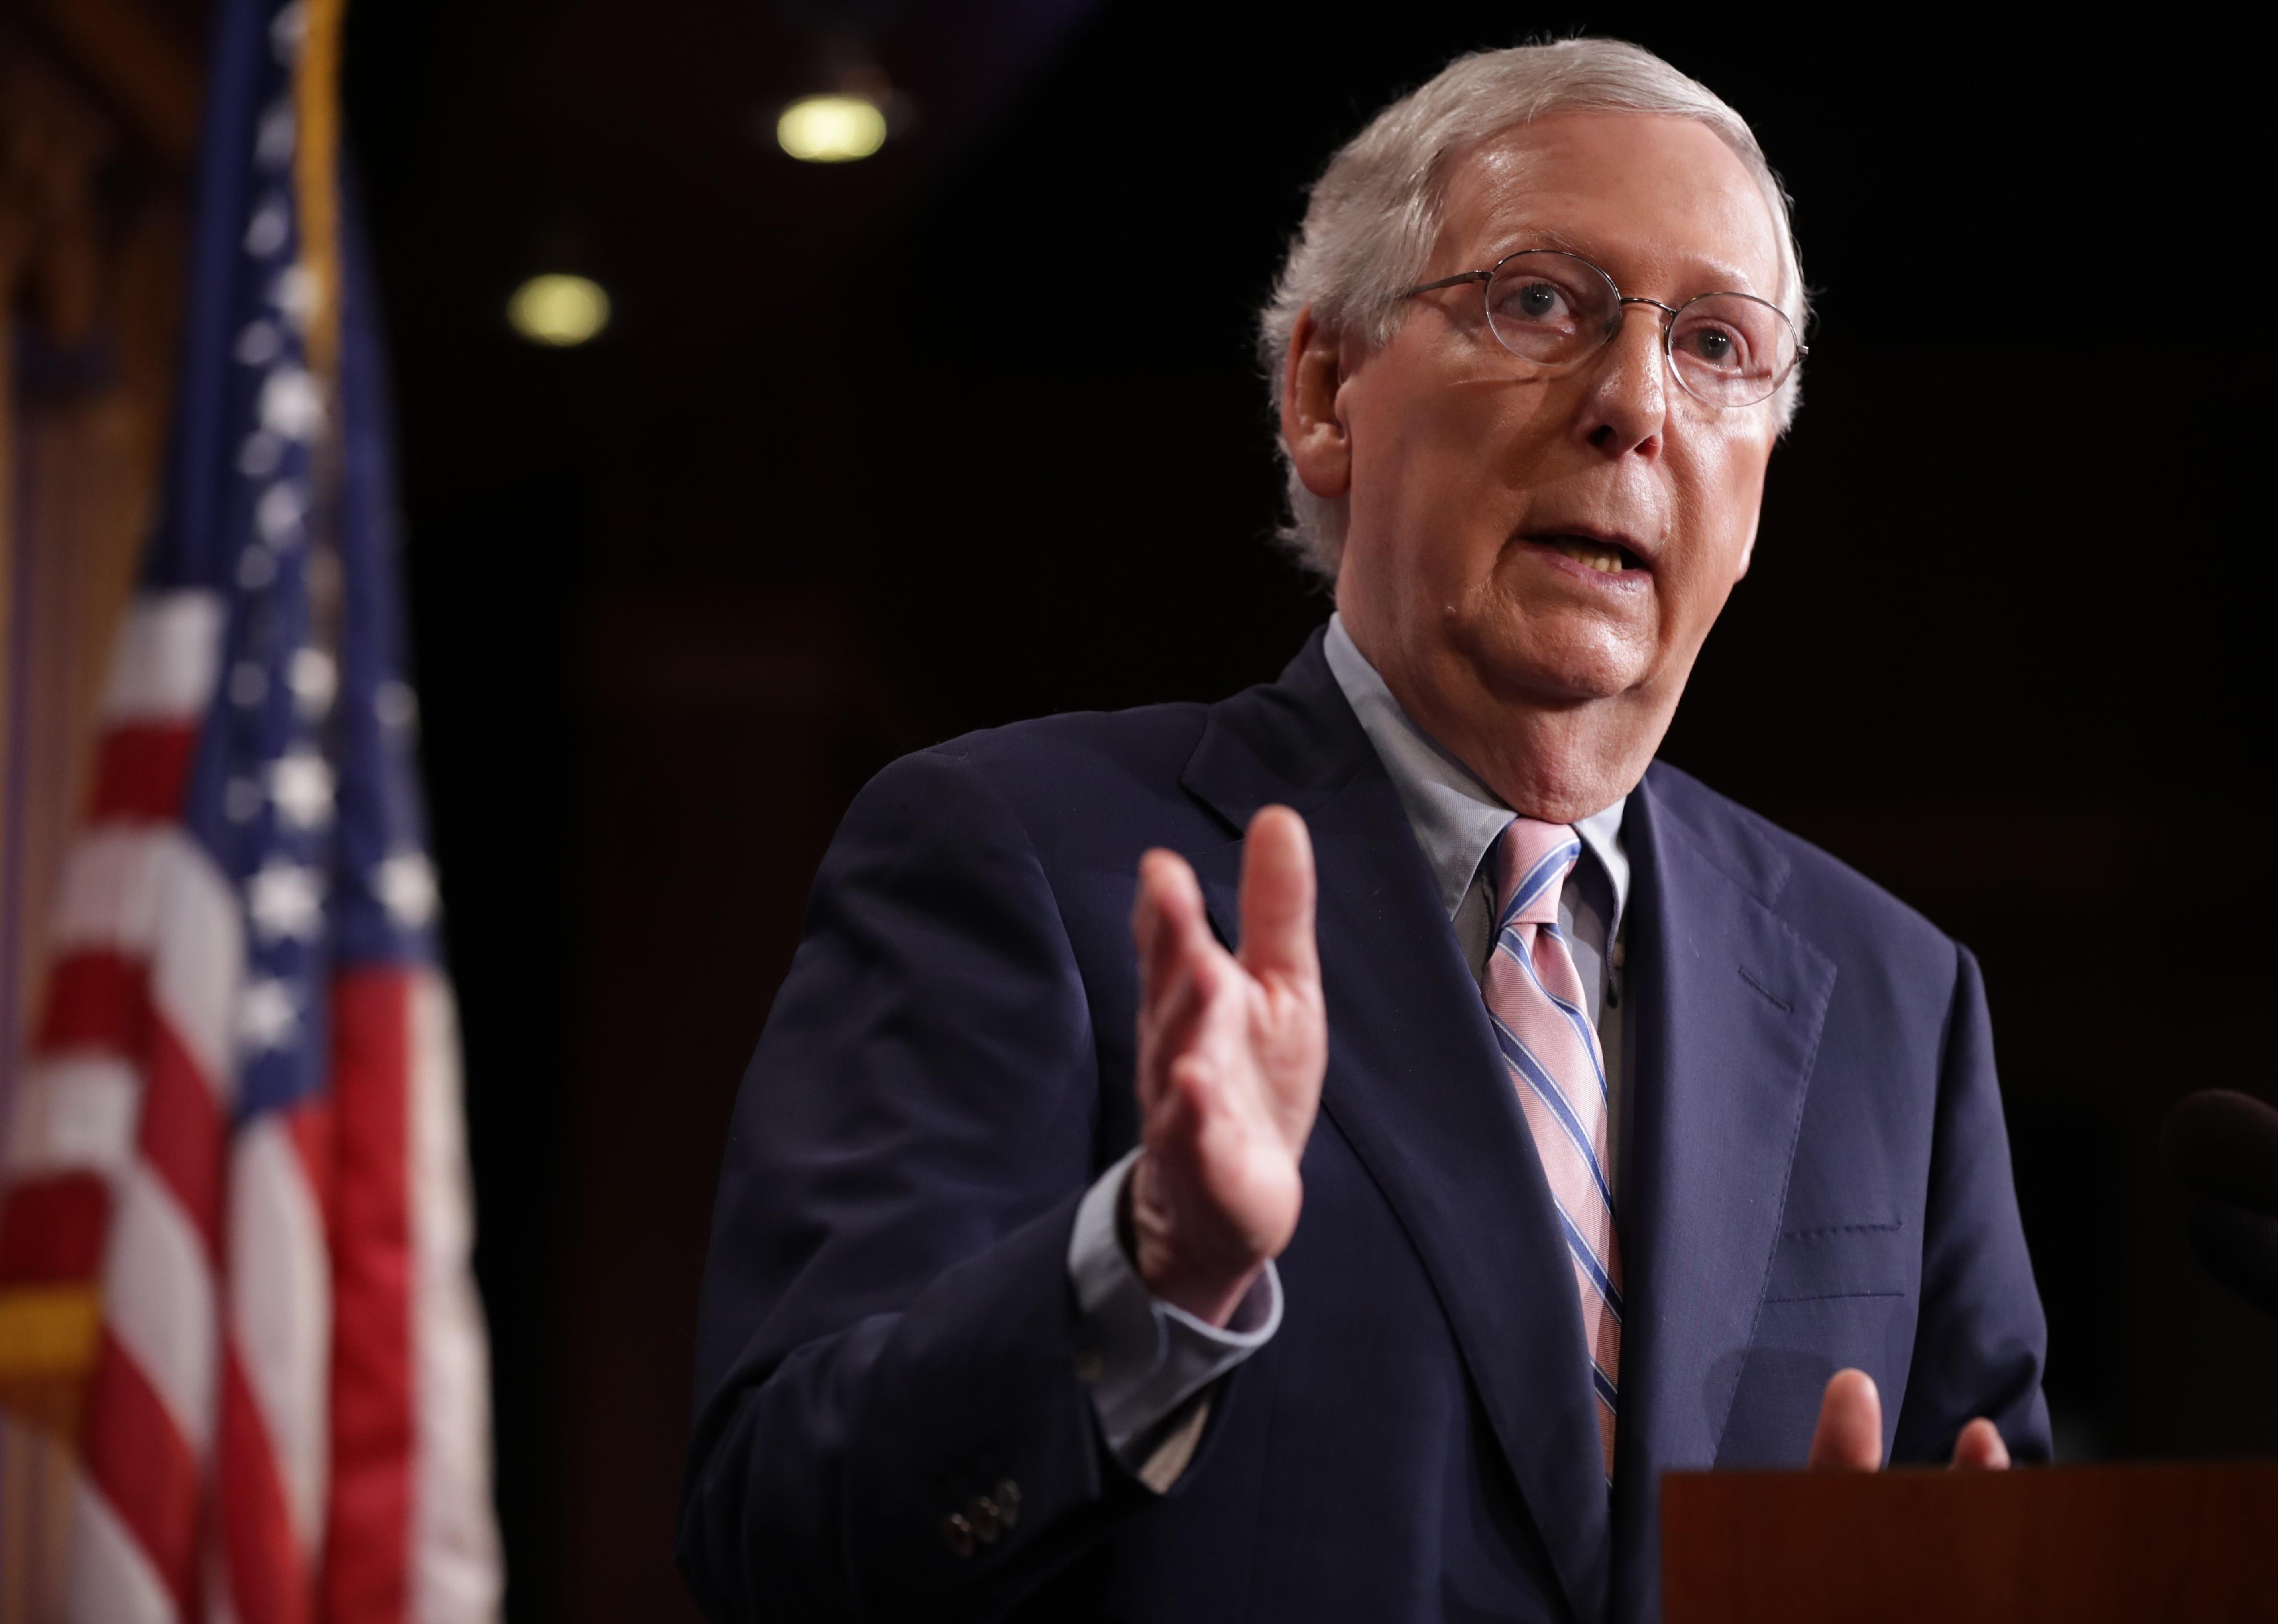 Mitch McConnell, in a suit, speaking at a podium in front of an American flag.